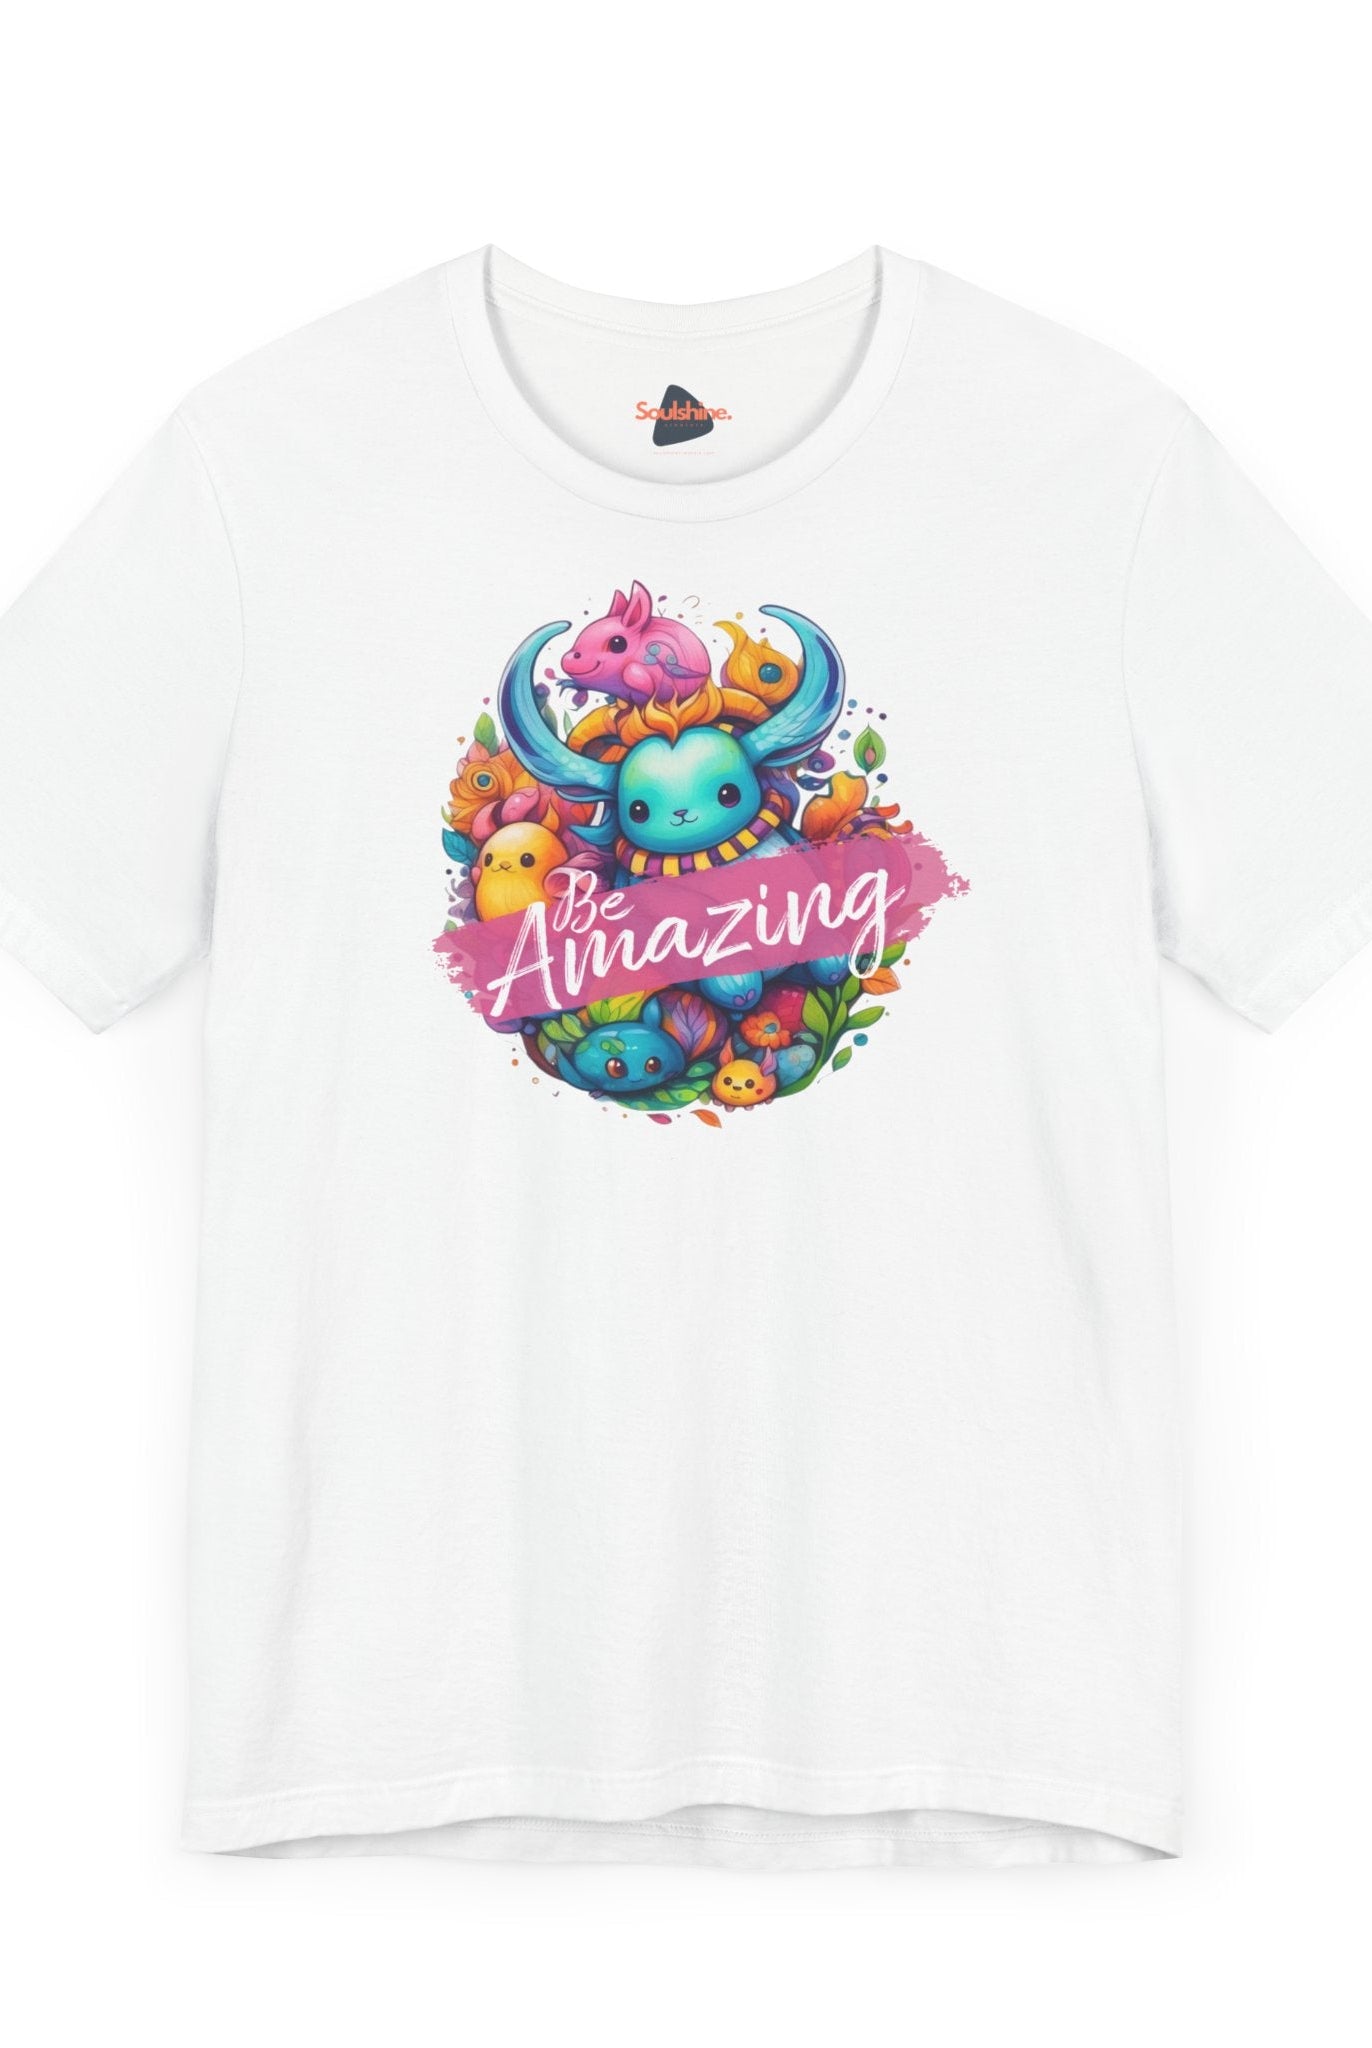 White t-shirt with ’Be Amazing’ printed on it - Bella & Canvas - Soulshinecreators - Unisex - Direct-to-Garment item